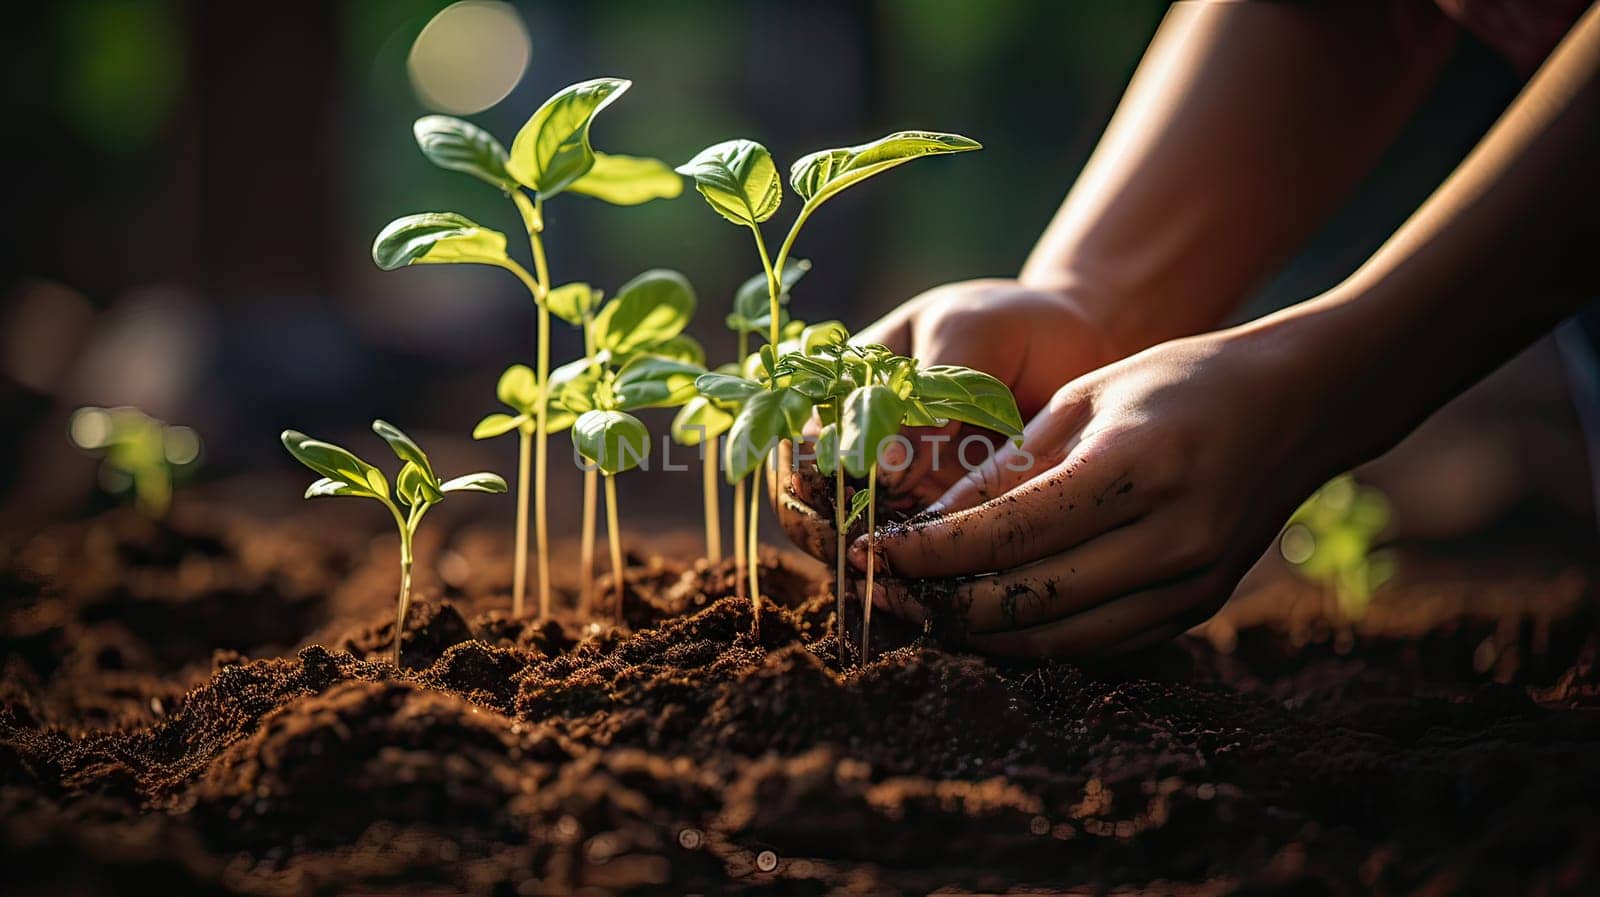 Hands nurturing soil for plant growth. Agriculture, gardening, and ecology concept. Female hands delicately touching the earth, preparing the ground for sowing vegetable or plant seedlings